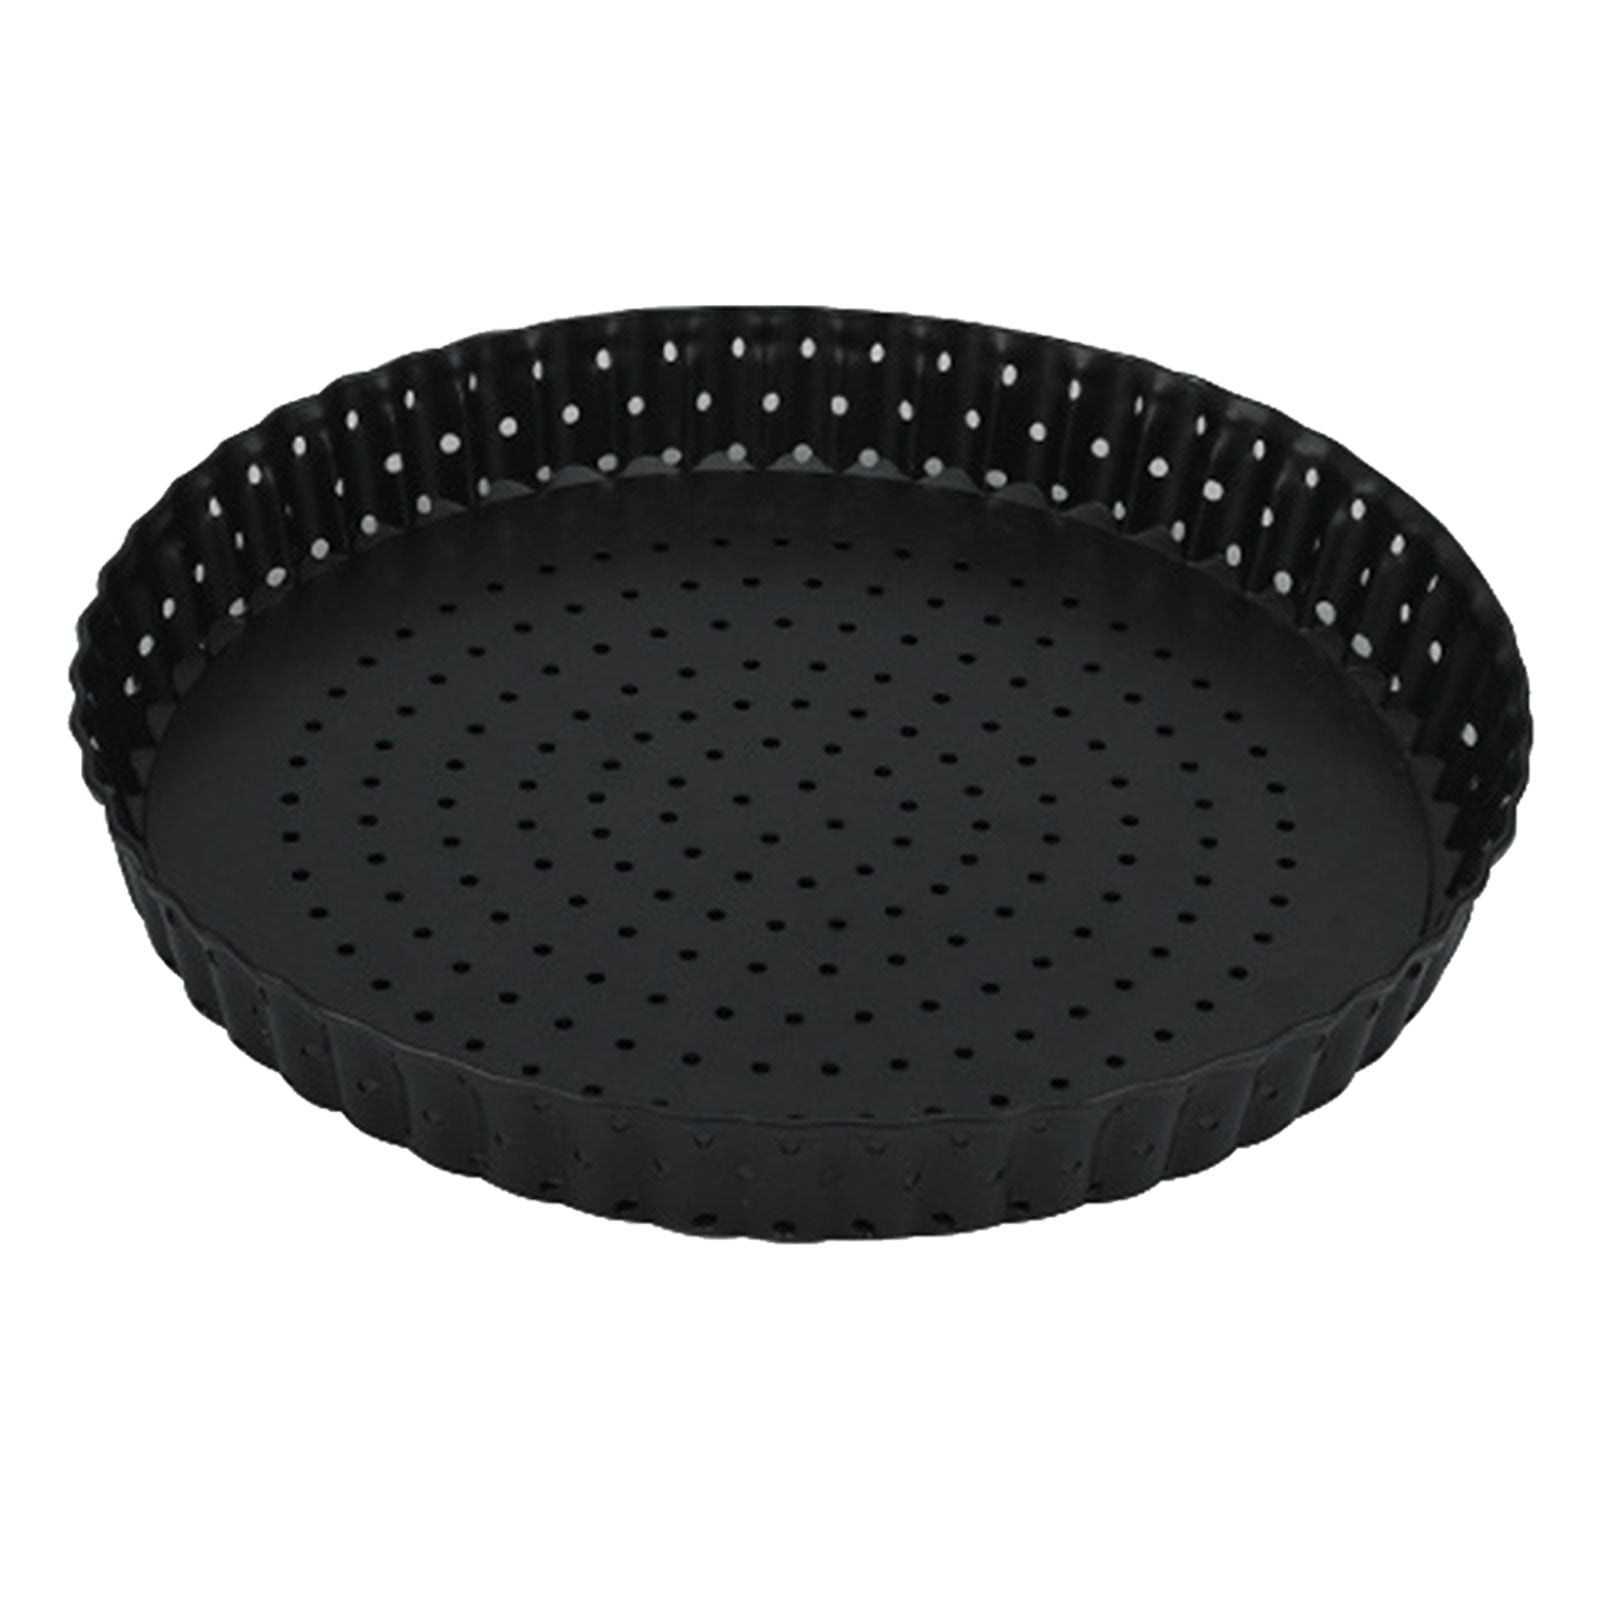 Details about   11 inch Baking Pizza Pan Round Tray With Hole Carbon Steel Bakeware Kitchen Tool 